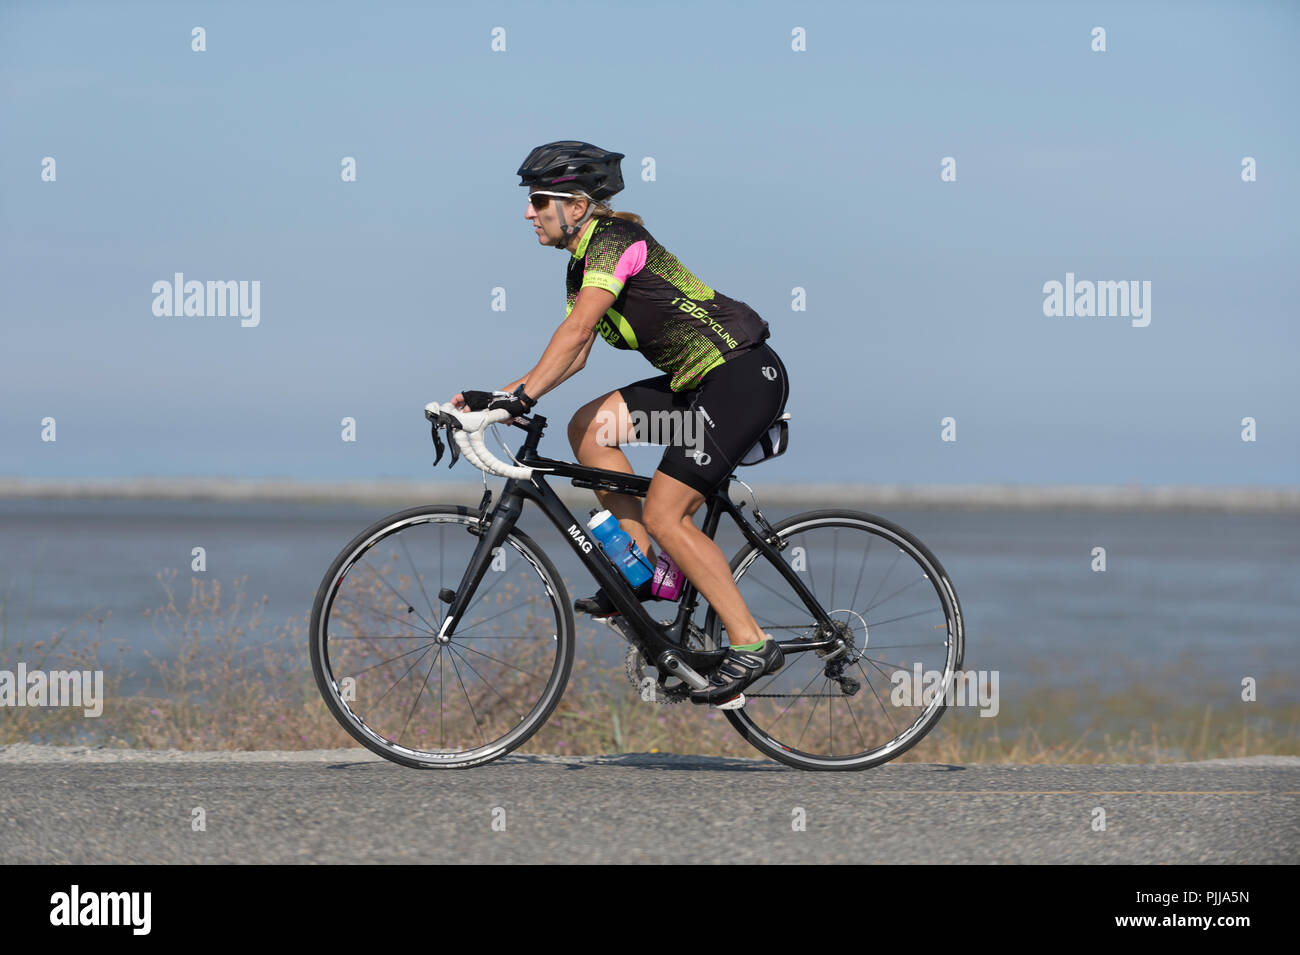 Female bicyclist wearing a helmet, cycling down a roadway. Stock Photo